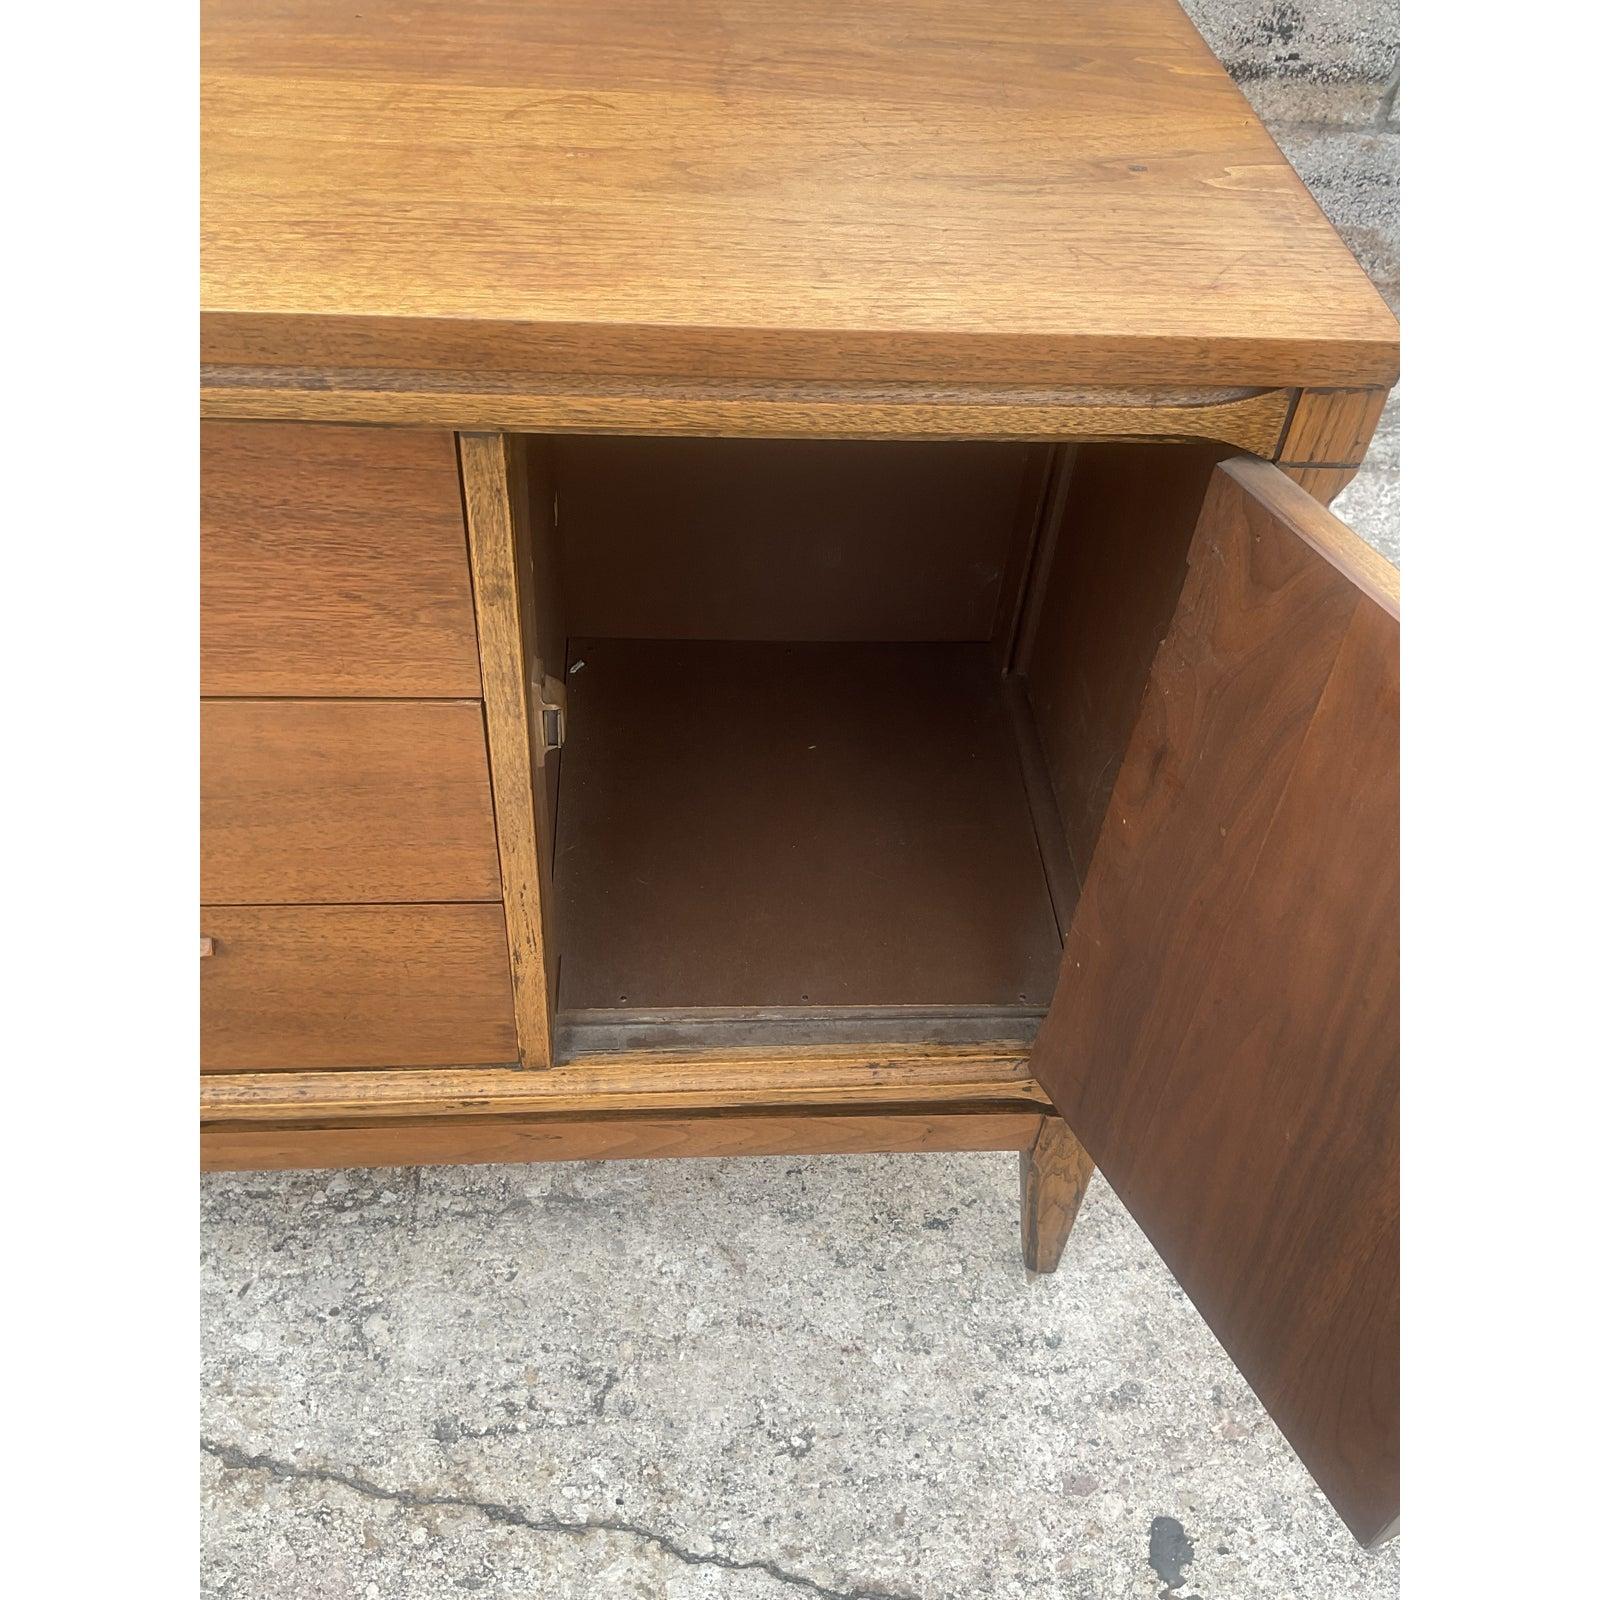 Gorgeous vintage midcentury sideboard. Beautiful Bassett cabinet with beautiful parquet wood detail. Chic variations in wood really make this cabinet a standout. Acquired from a Palm Beach estate.